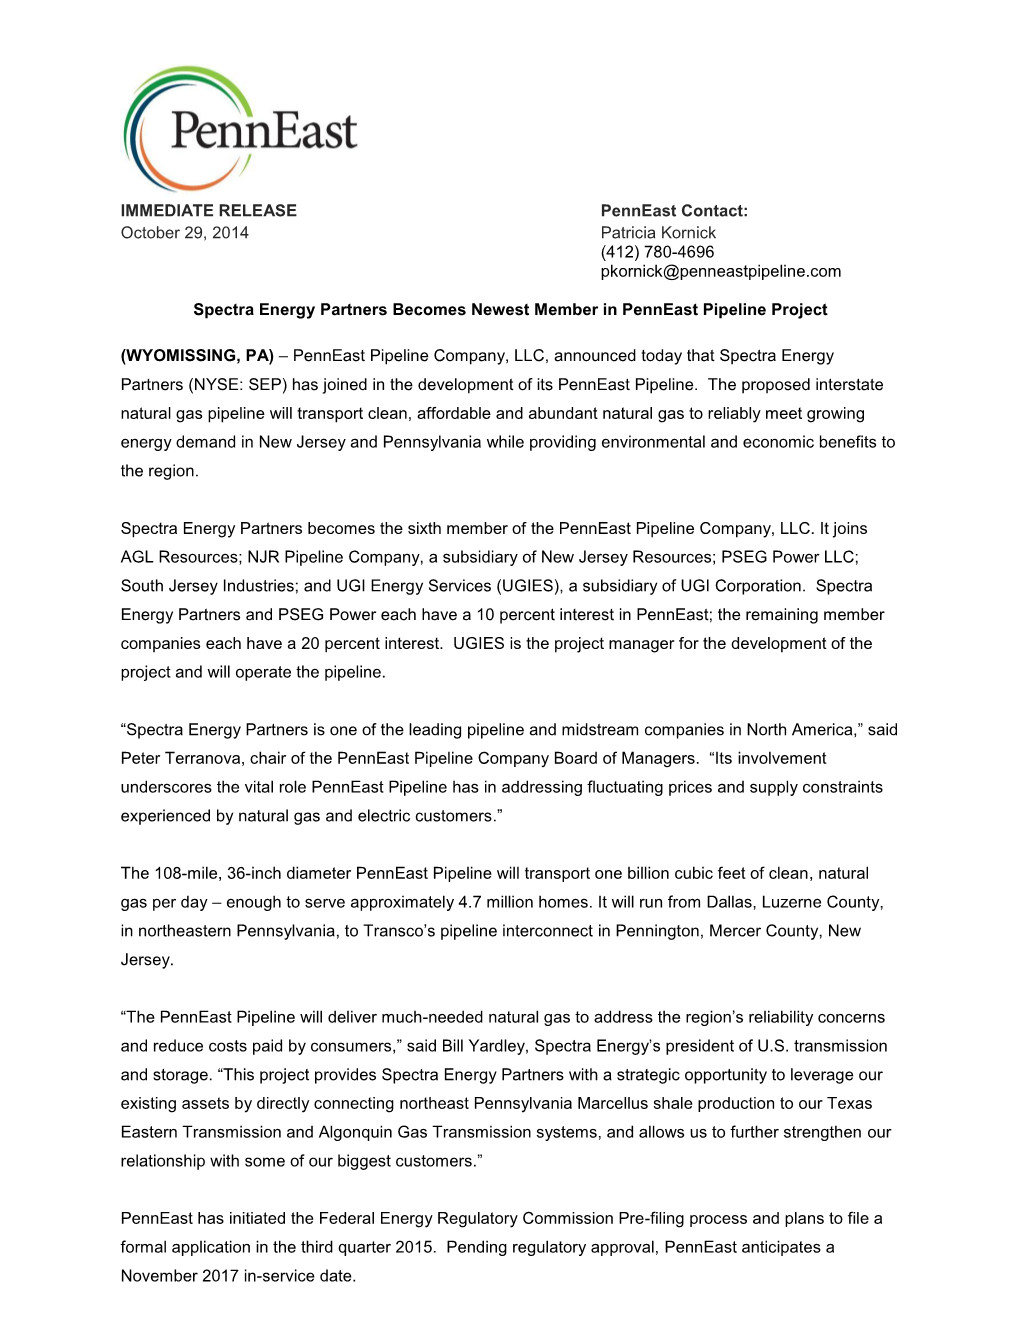 Penneast Pipeline Company Welcomes Spectra Energy